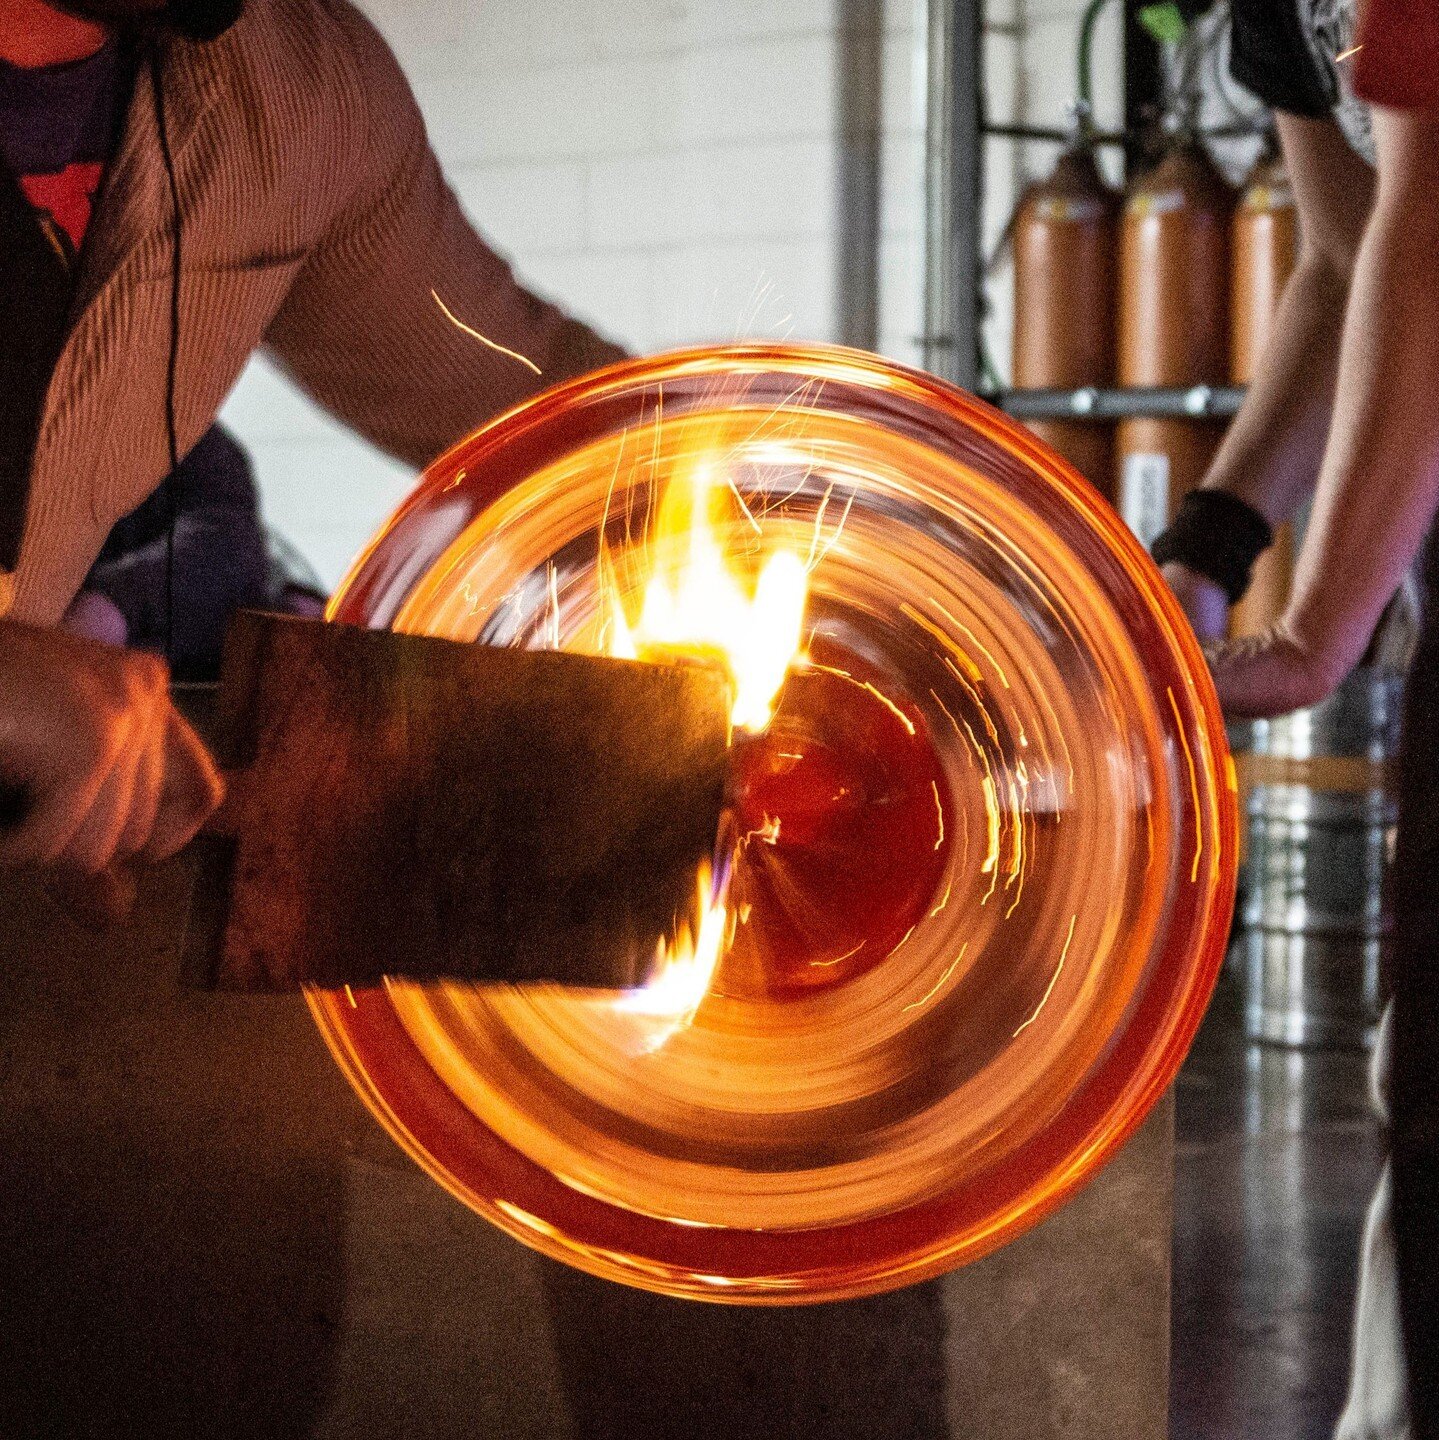 Do you remember the first time you saw the sunlight dance through a stained glass window pane, watched someone work with molten glass, or learned the artform yourself? ⁠
⁠
Consider including Foci MCGA in your end of year giving! Your support of any s